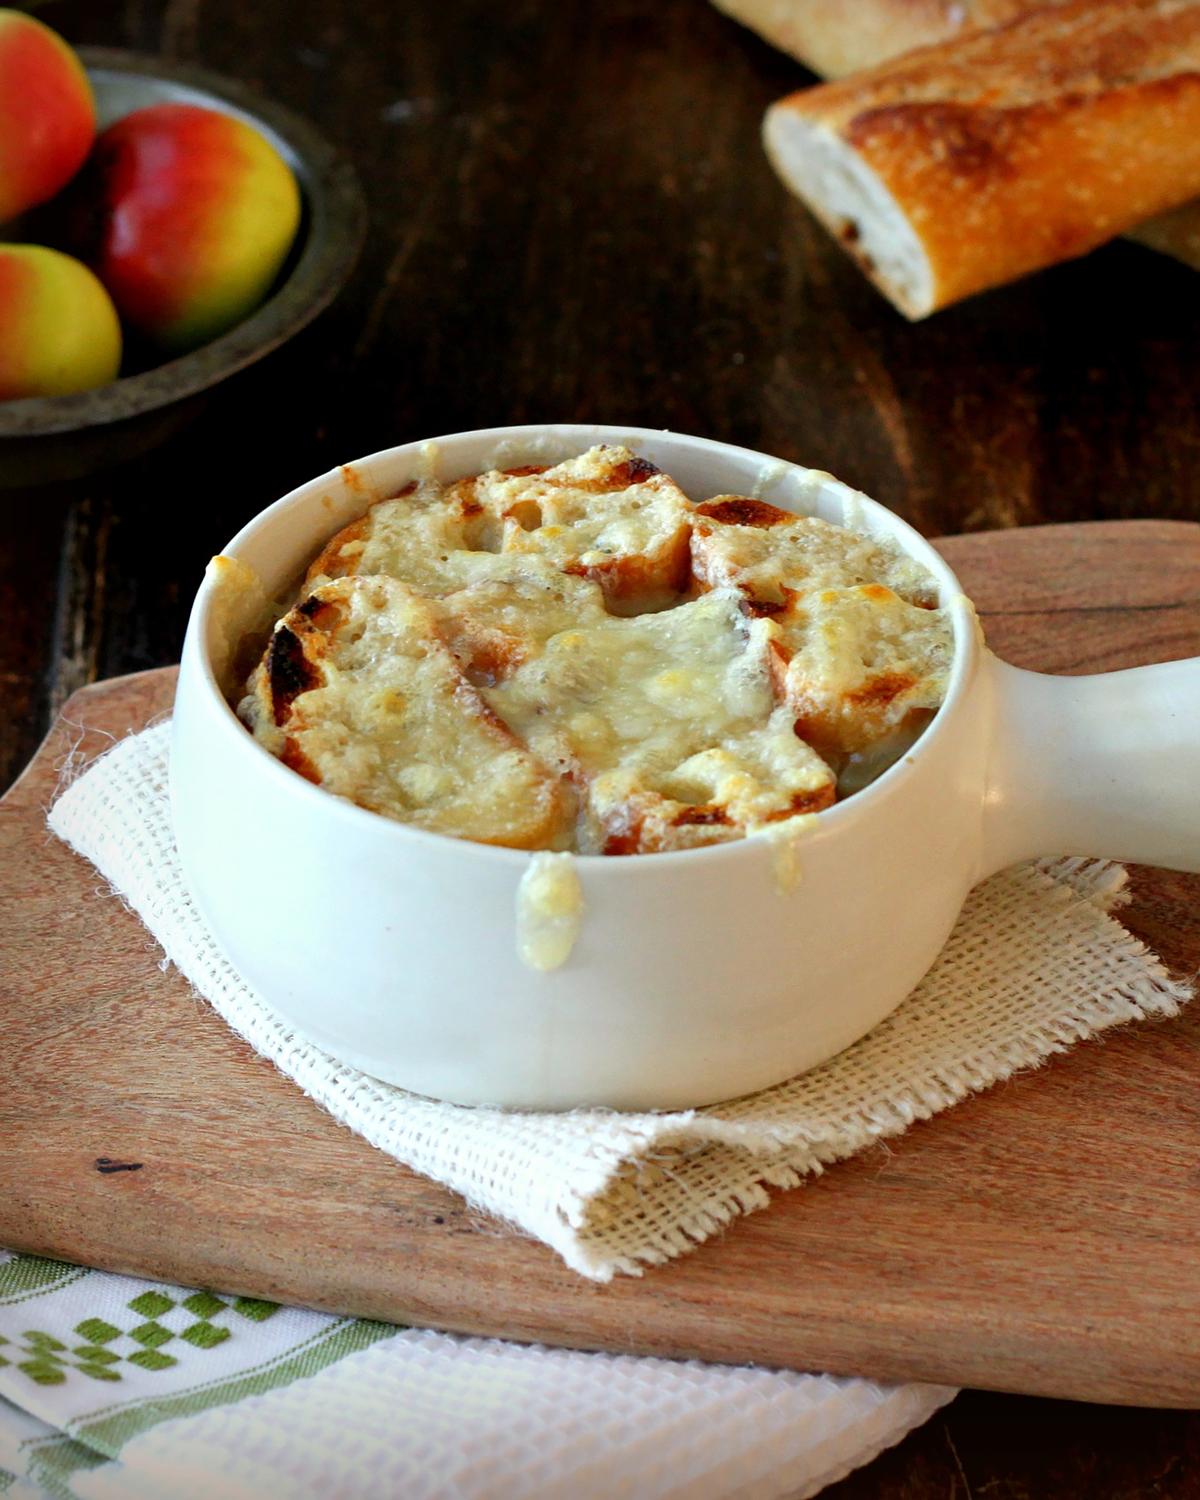 Sweet richness and caramelization is the hallmark of French onion soup. (Lynda Balslev for Tastefood)